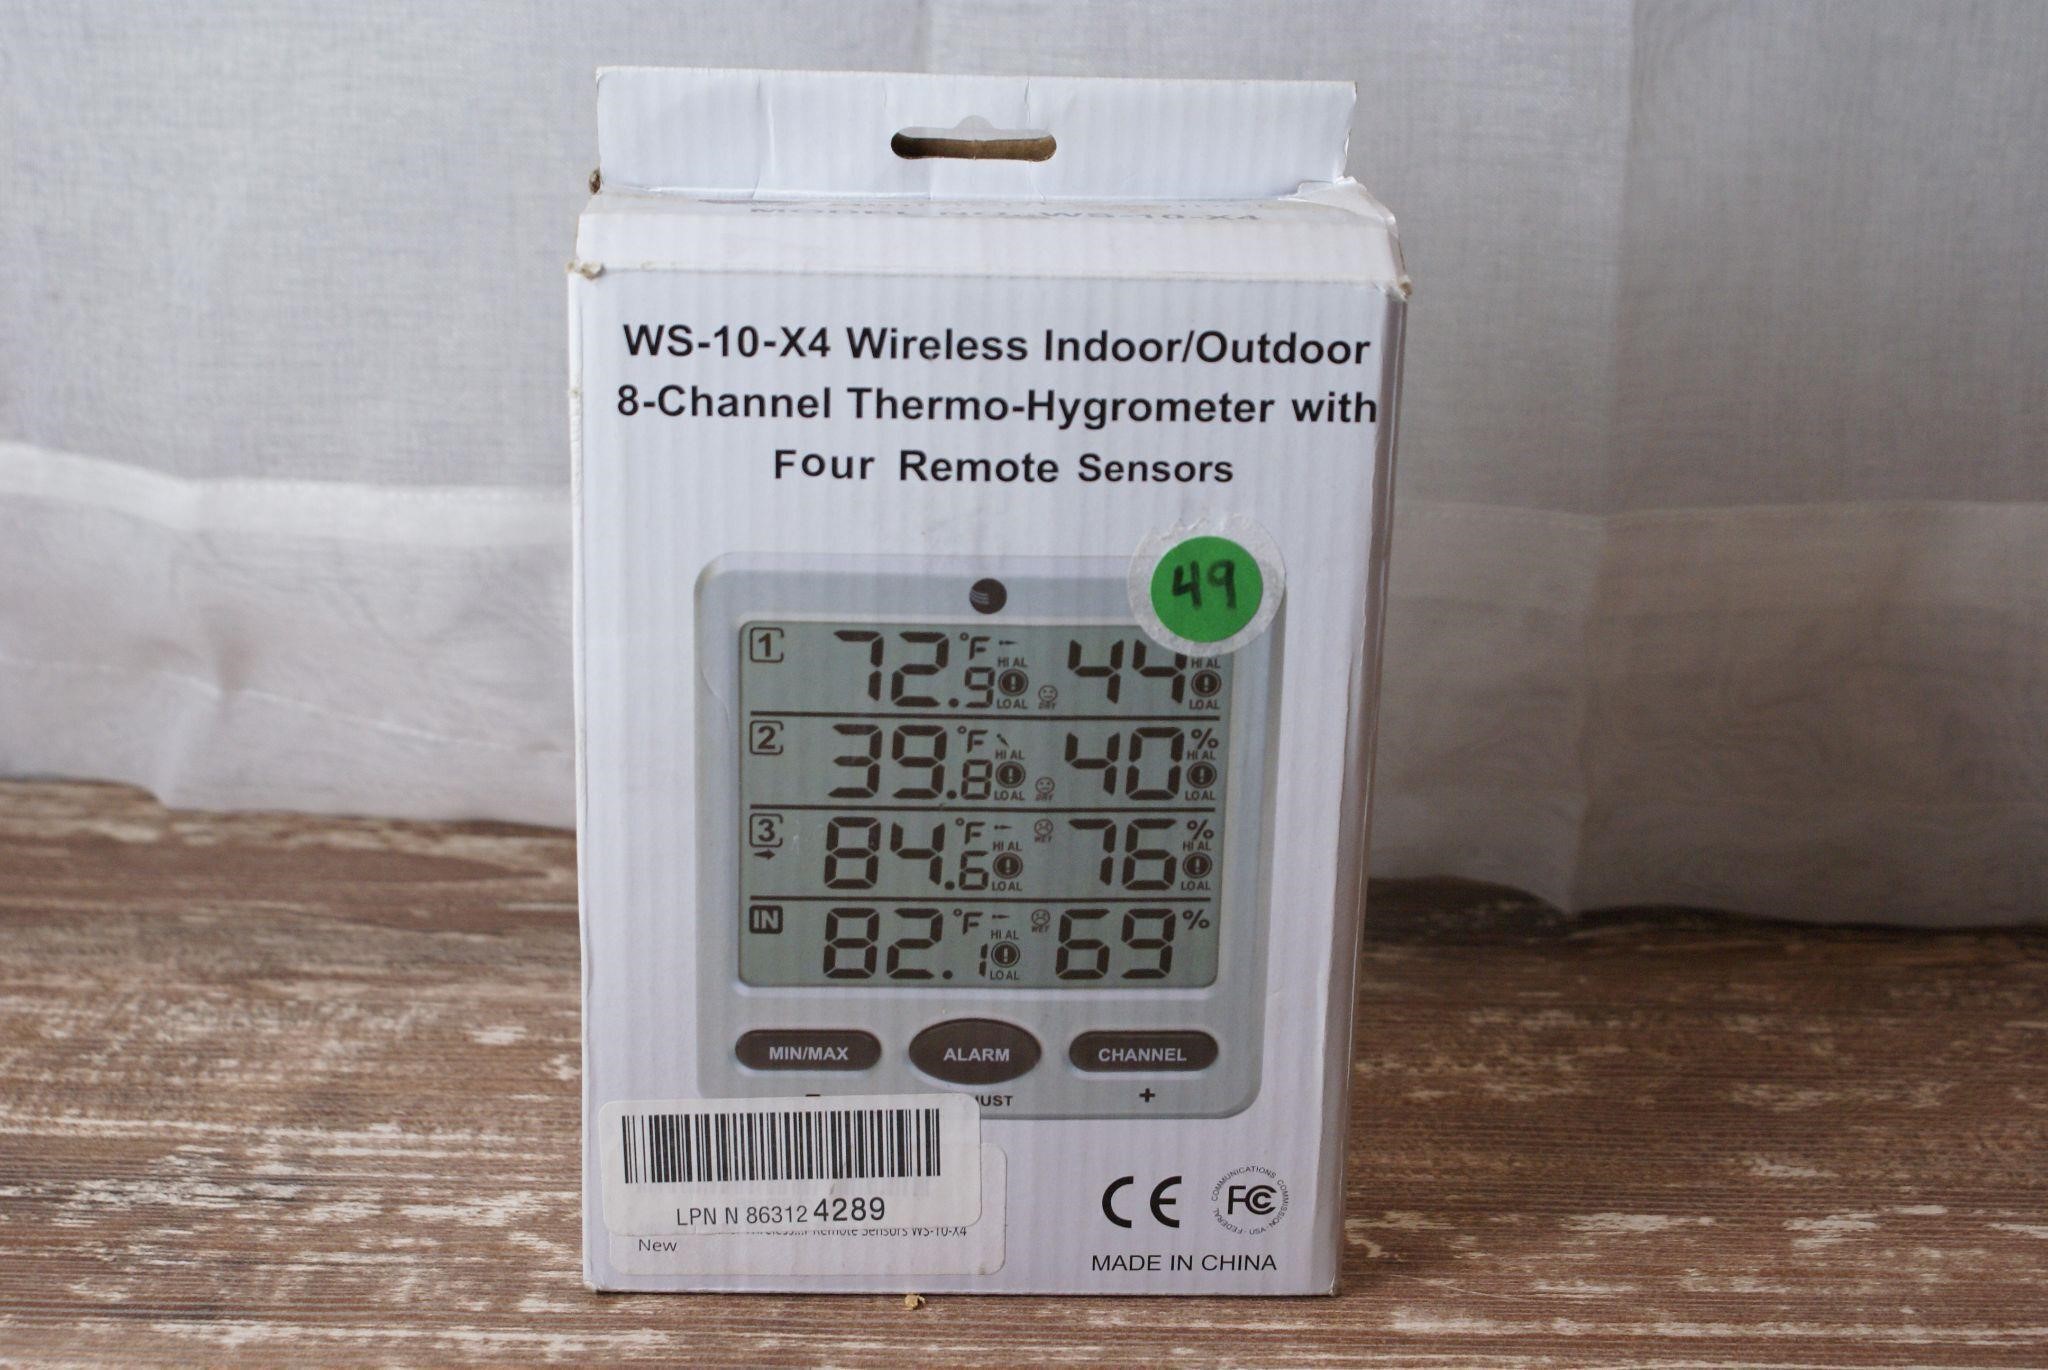 WS-10-X4 Wireless In/outdoor Thermo Hygrometer